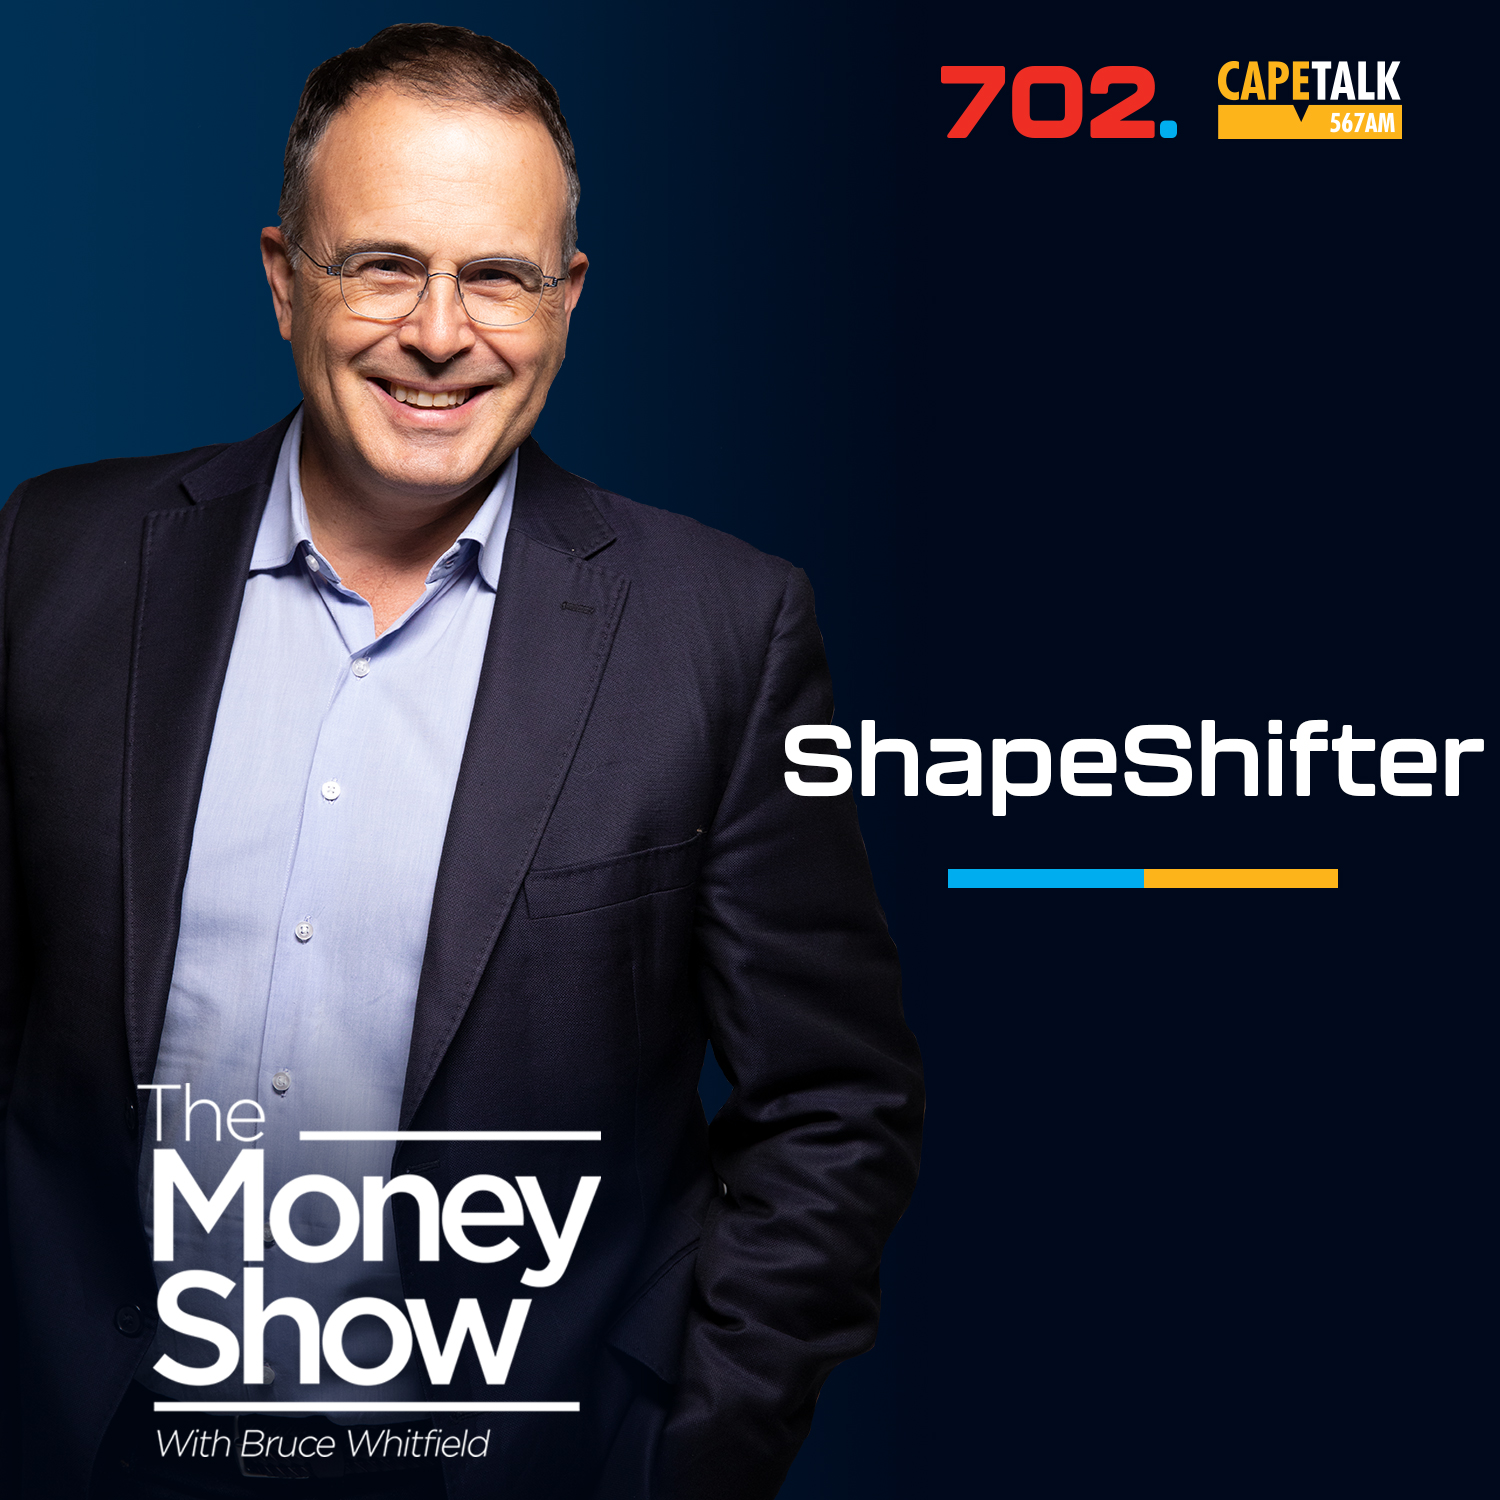 Shapeshifter -  Whitey Basson, former Managing Director and Chief Executive of Shoprite Holdings